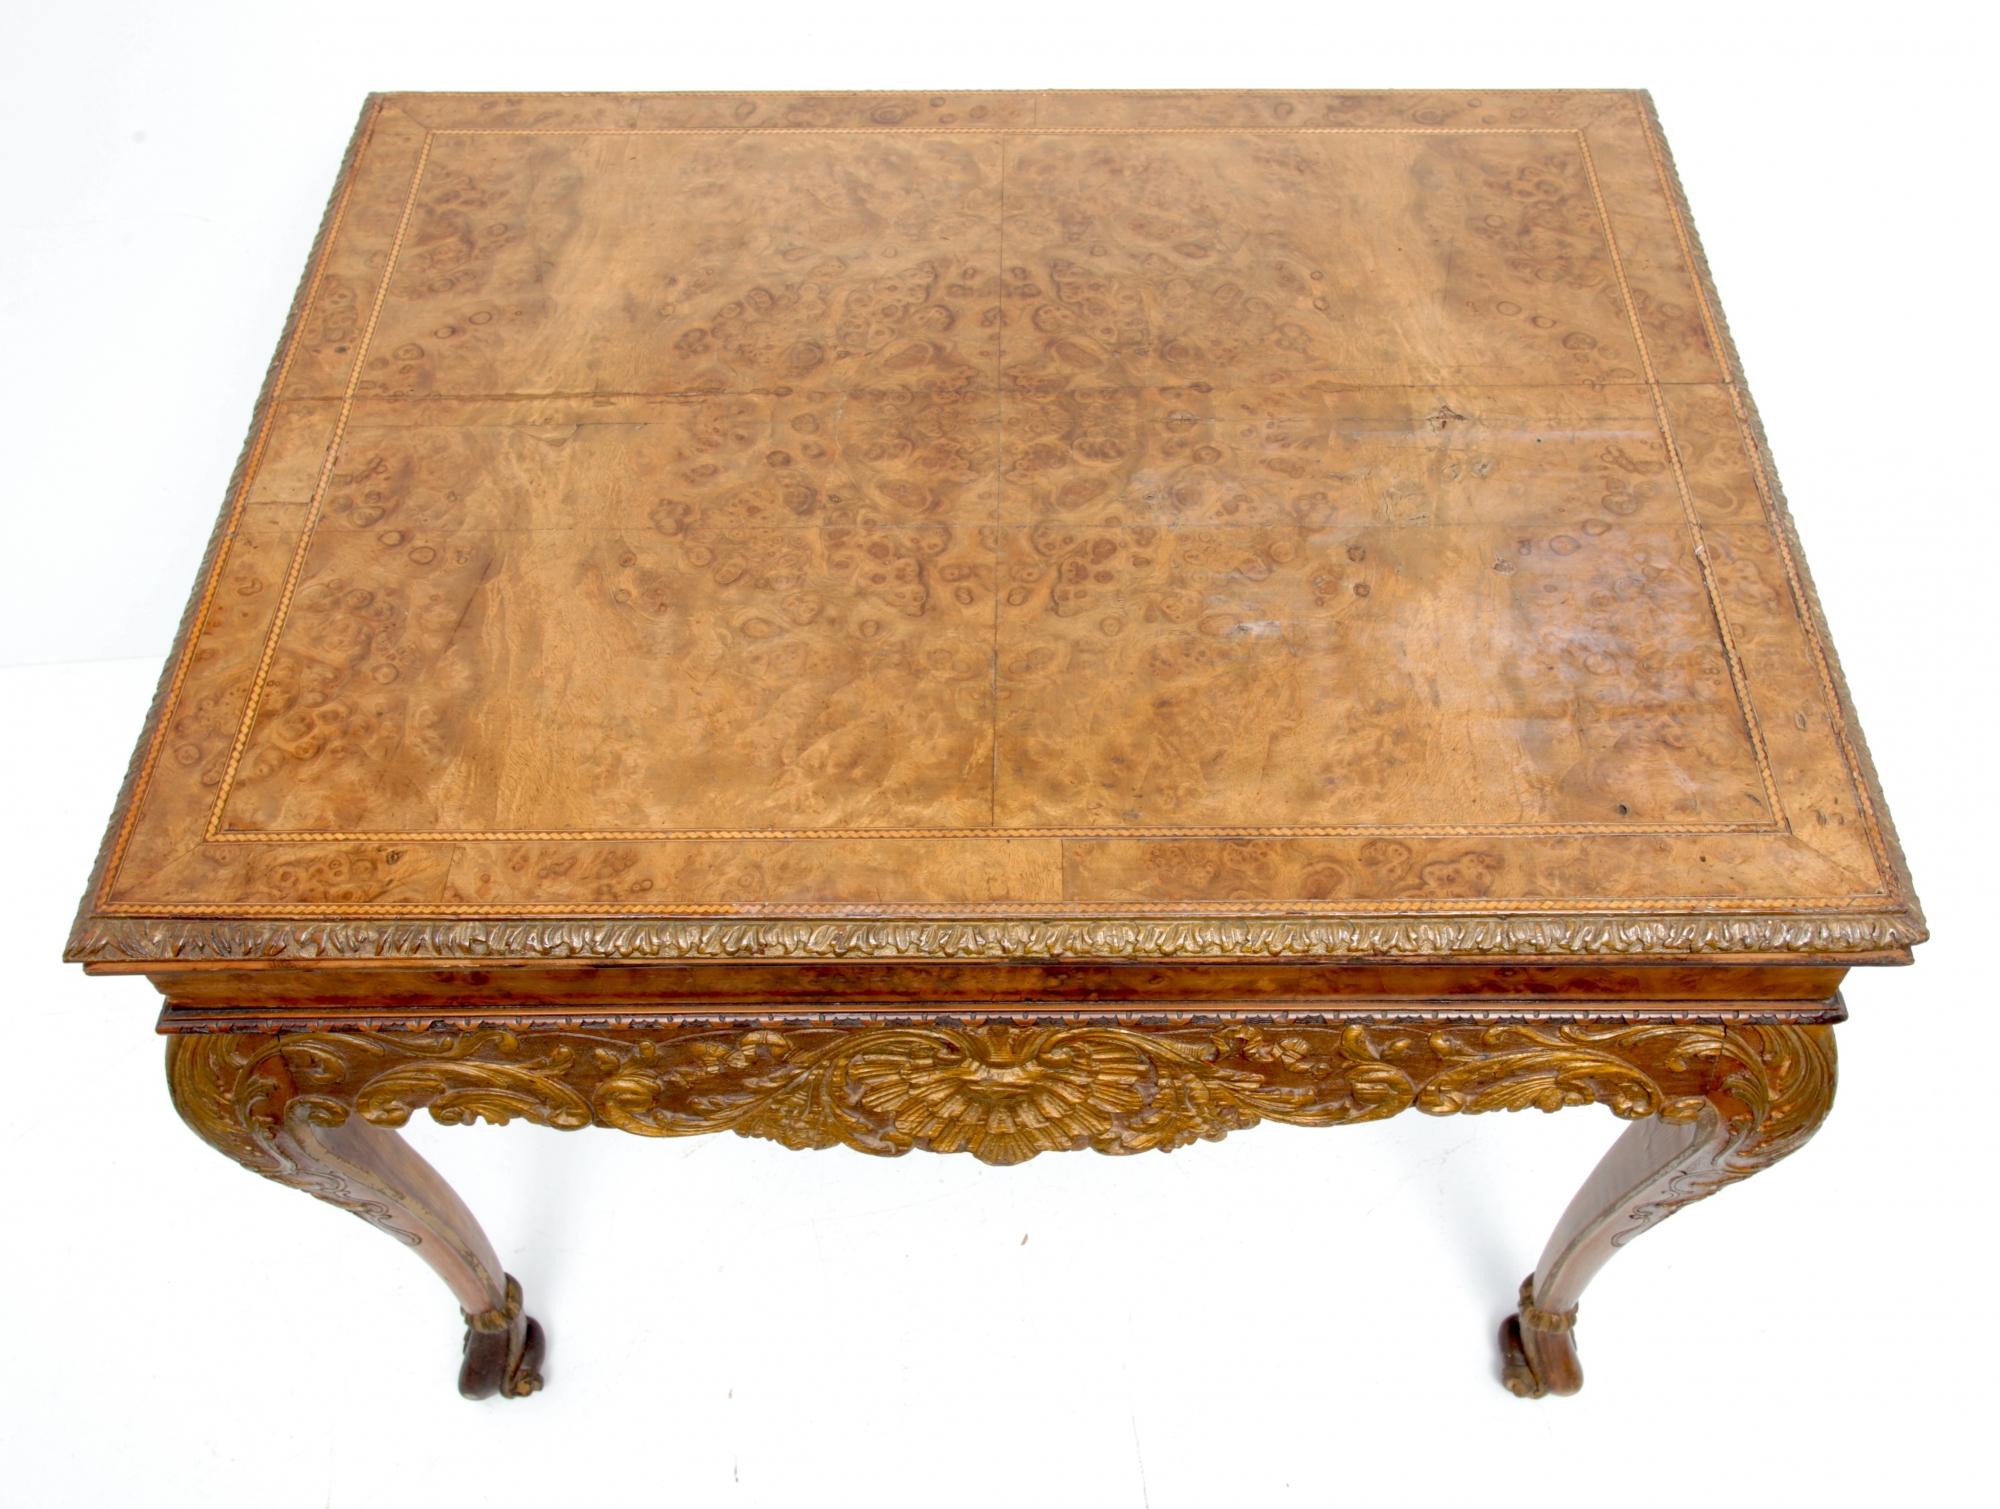 Late 18th Century Louis Xv Fruitwood Side Table